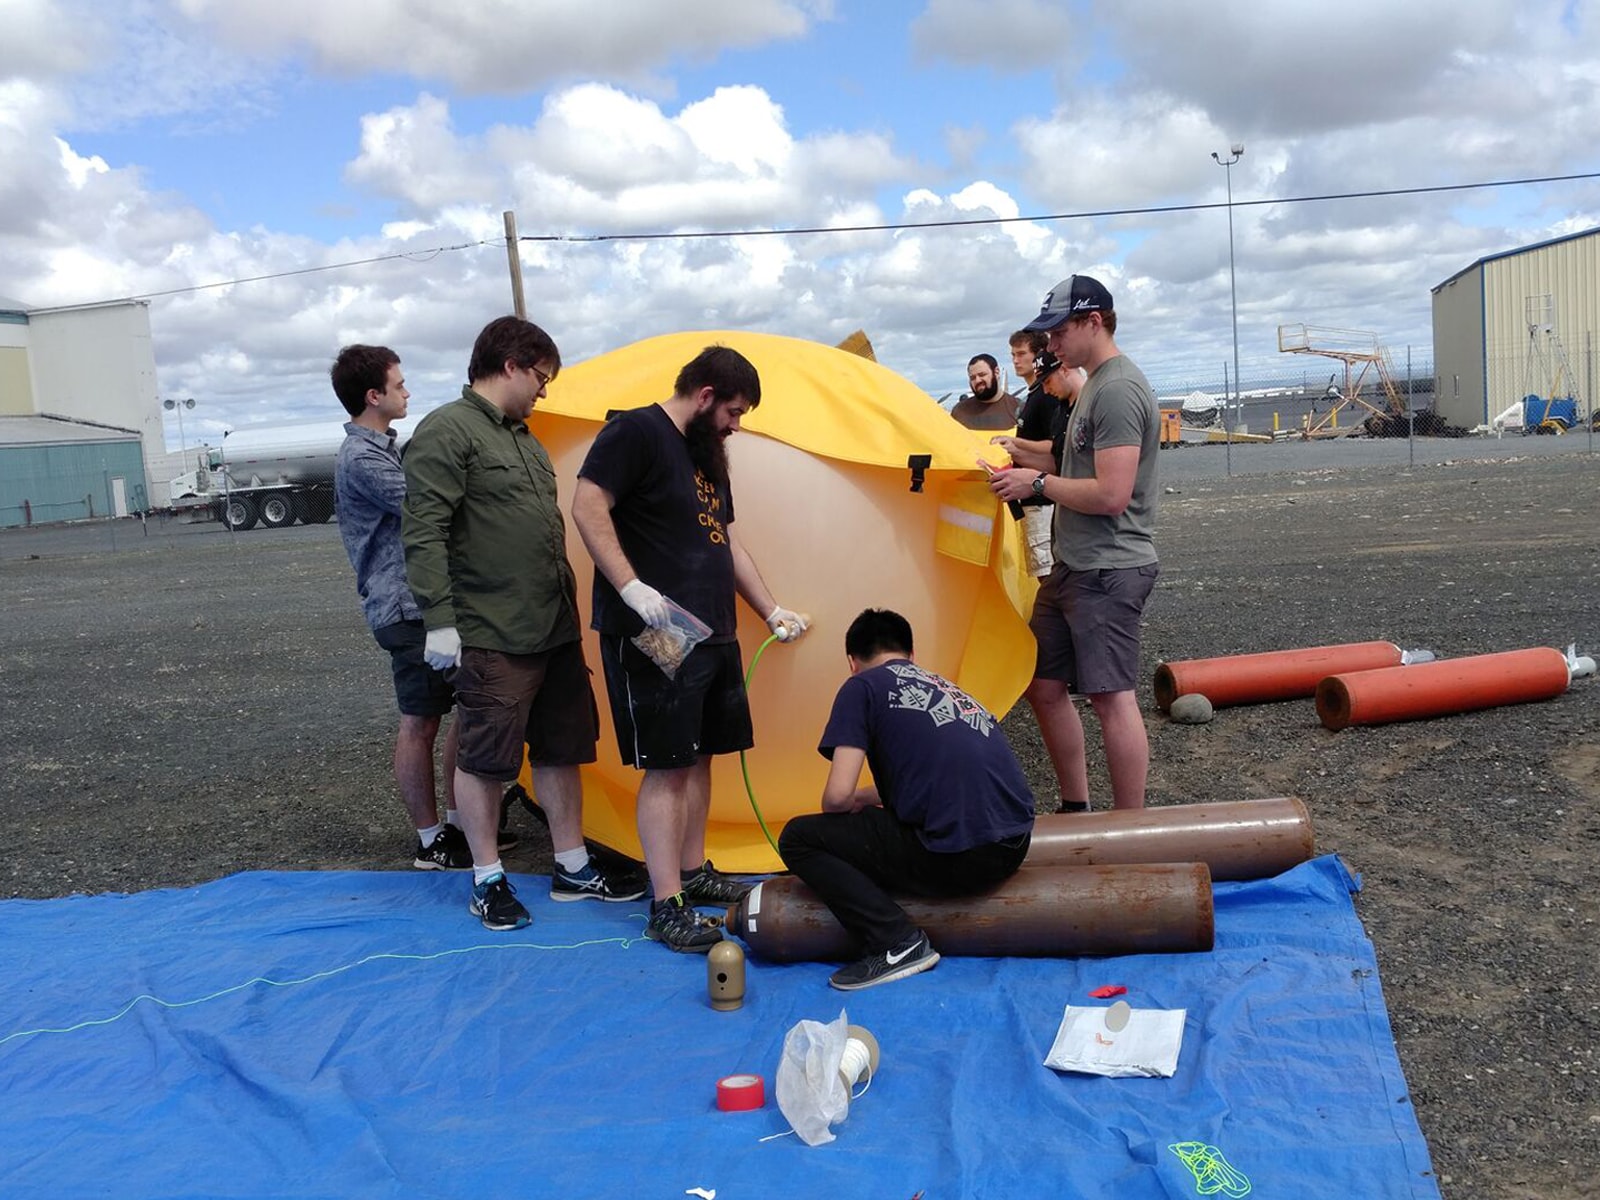 DigiPen students and faculty preparing to launch a large high-altitude weather balloon